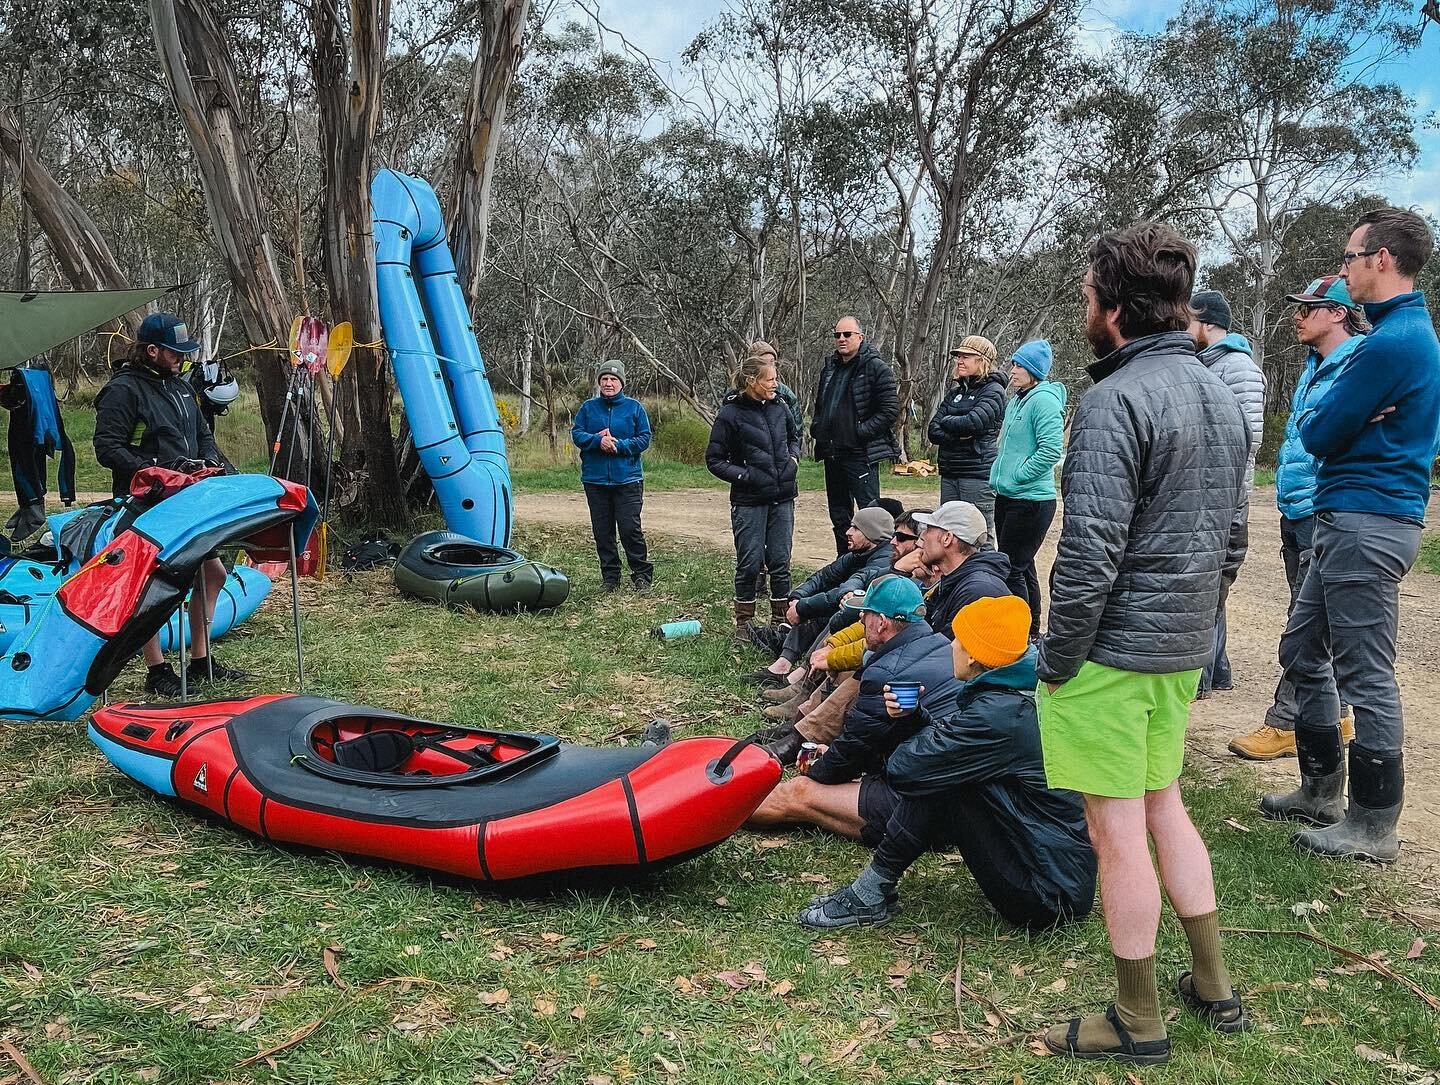 Thanks to all those who came out for the 2023 Victorian Packrafting Festival &ldquo;PackFest&rdquo;. Great to meet so many enthusiastic packrafter&rsquo;s during our workshops and boat demos throughout the weekend. Looking forward to next year alread